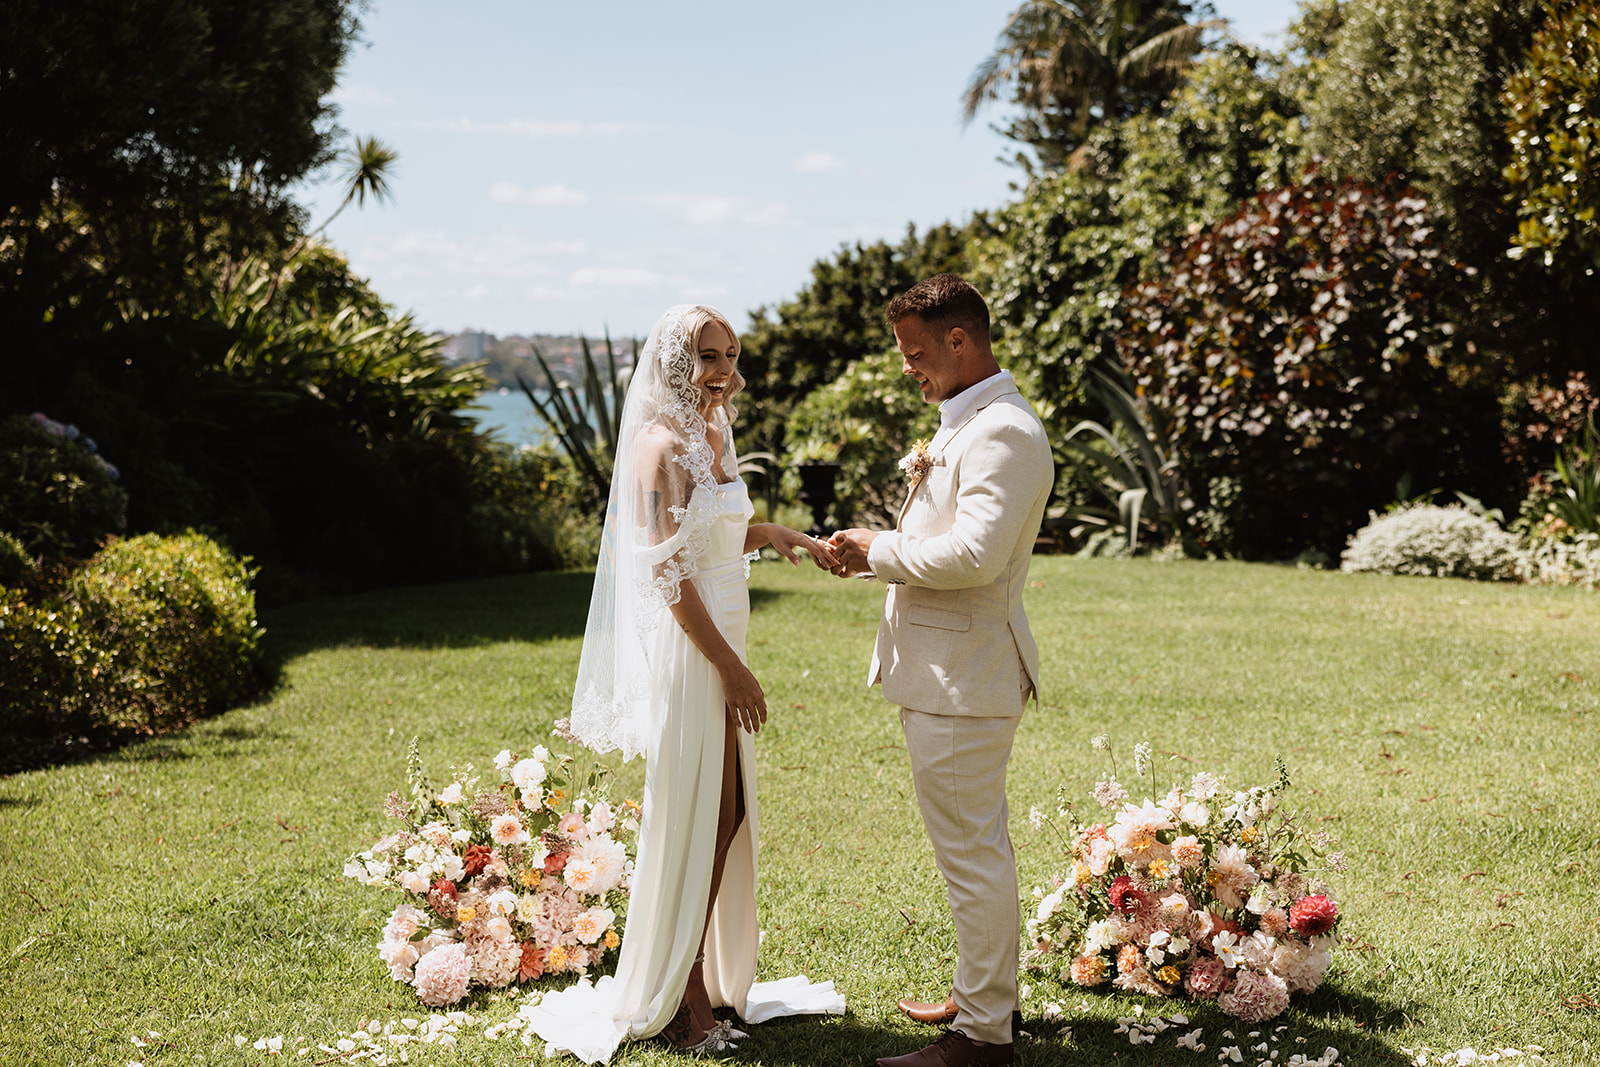 Exchanging of rings at the Wedding in Lindesay House, Darling Point New South Wales